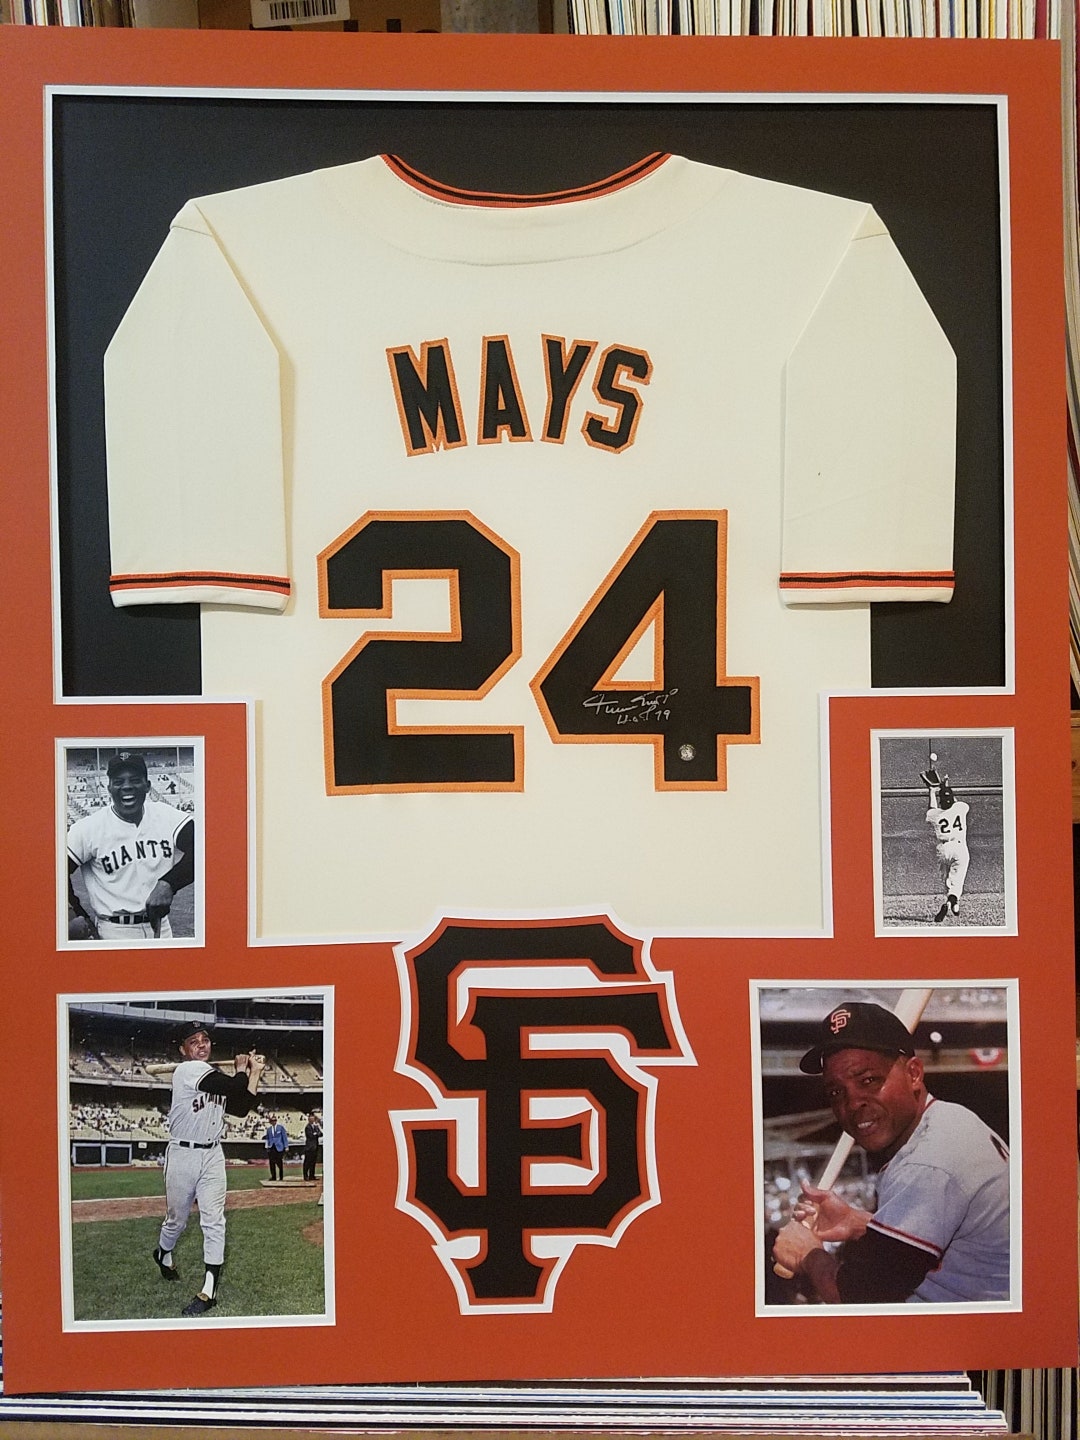 Willie Mays Signed Authentic Majestic San Francisco Giants Jersey